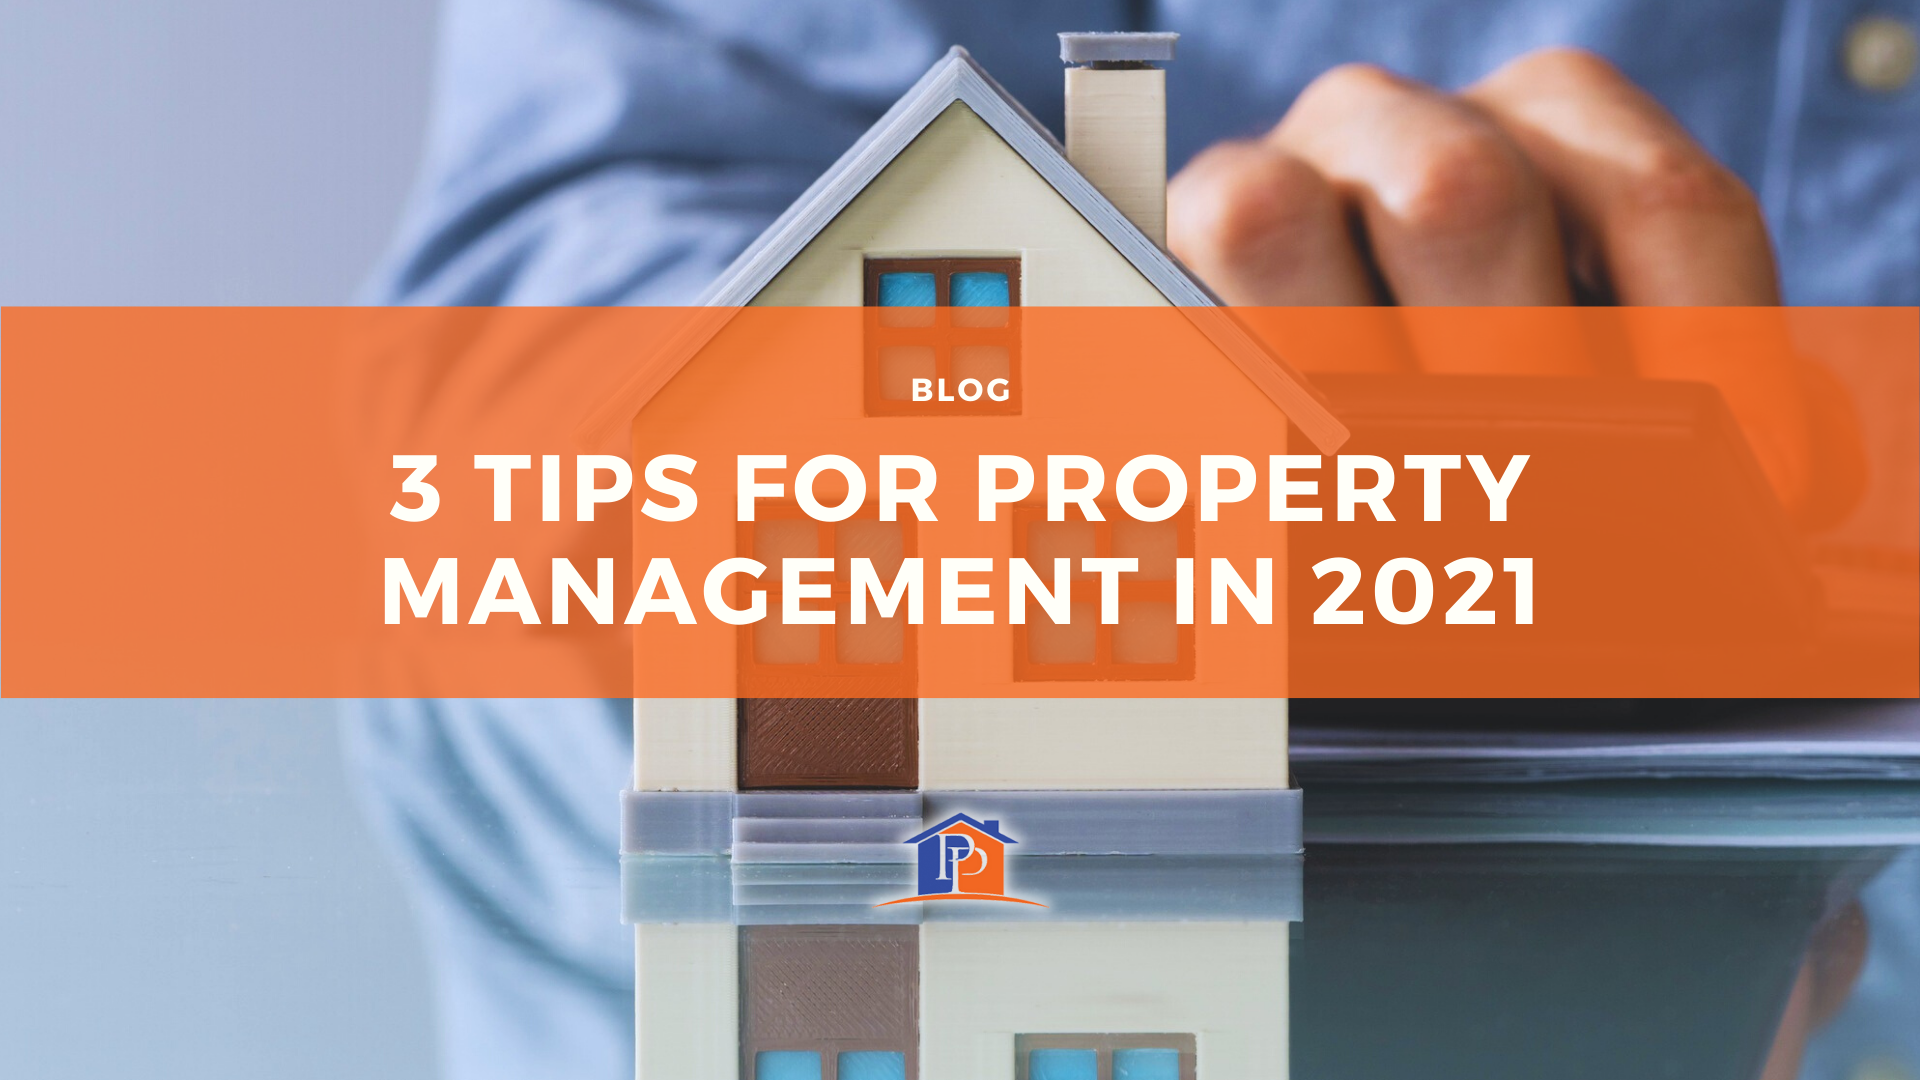 3 Tips for Property Management in 2021